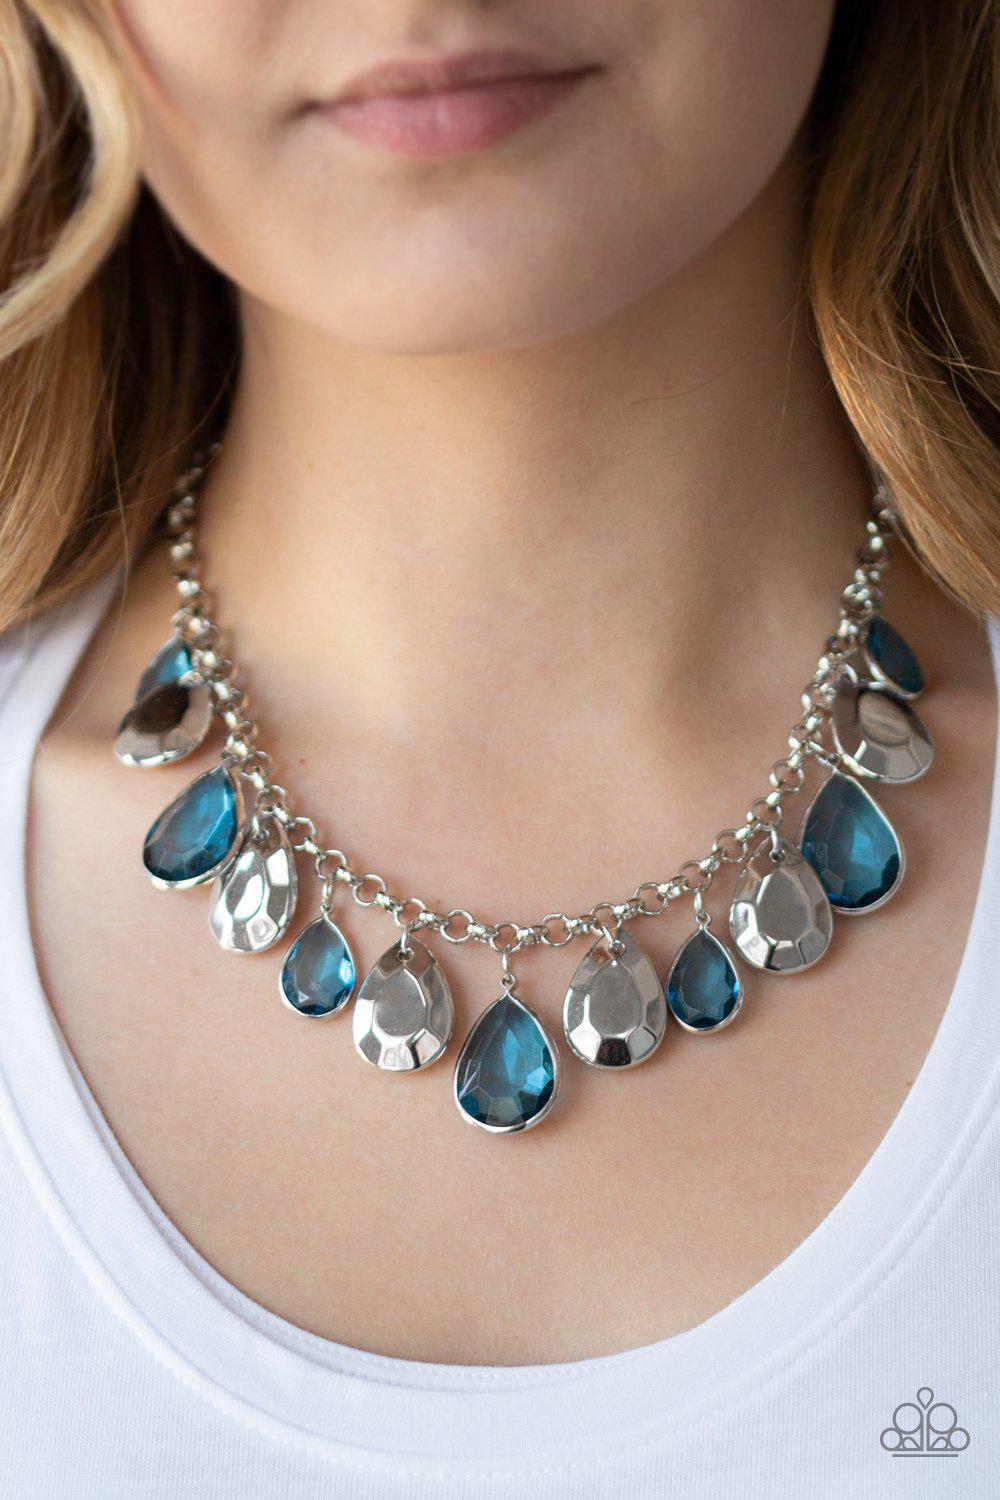 CLIQUE-bait Blue and Silver Necklace - Paparazzi Accessories - model -CarasShop.com - $5 Jewelry by Cara Jewels